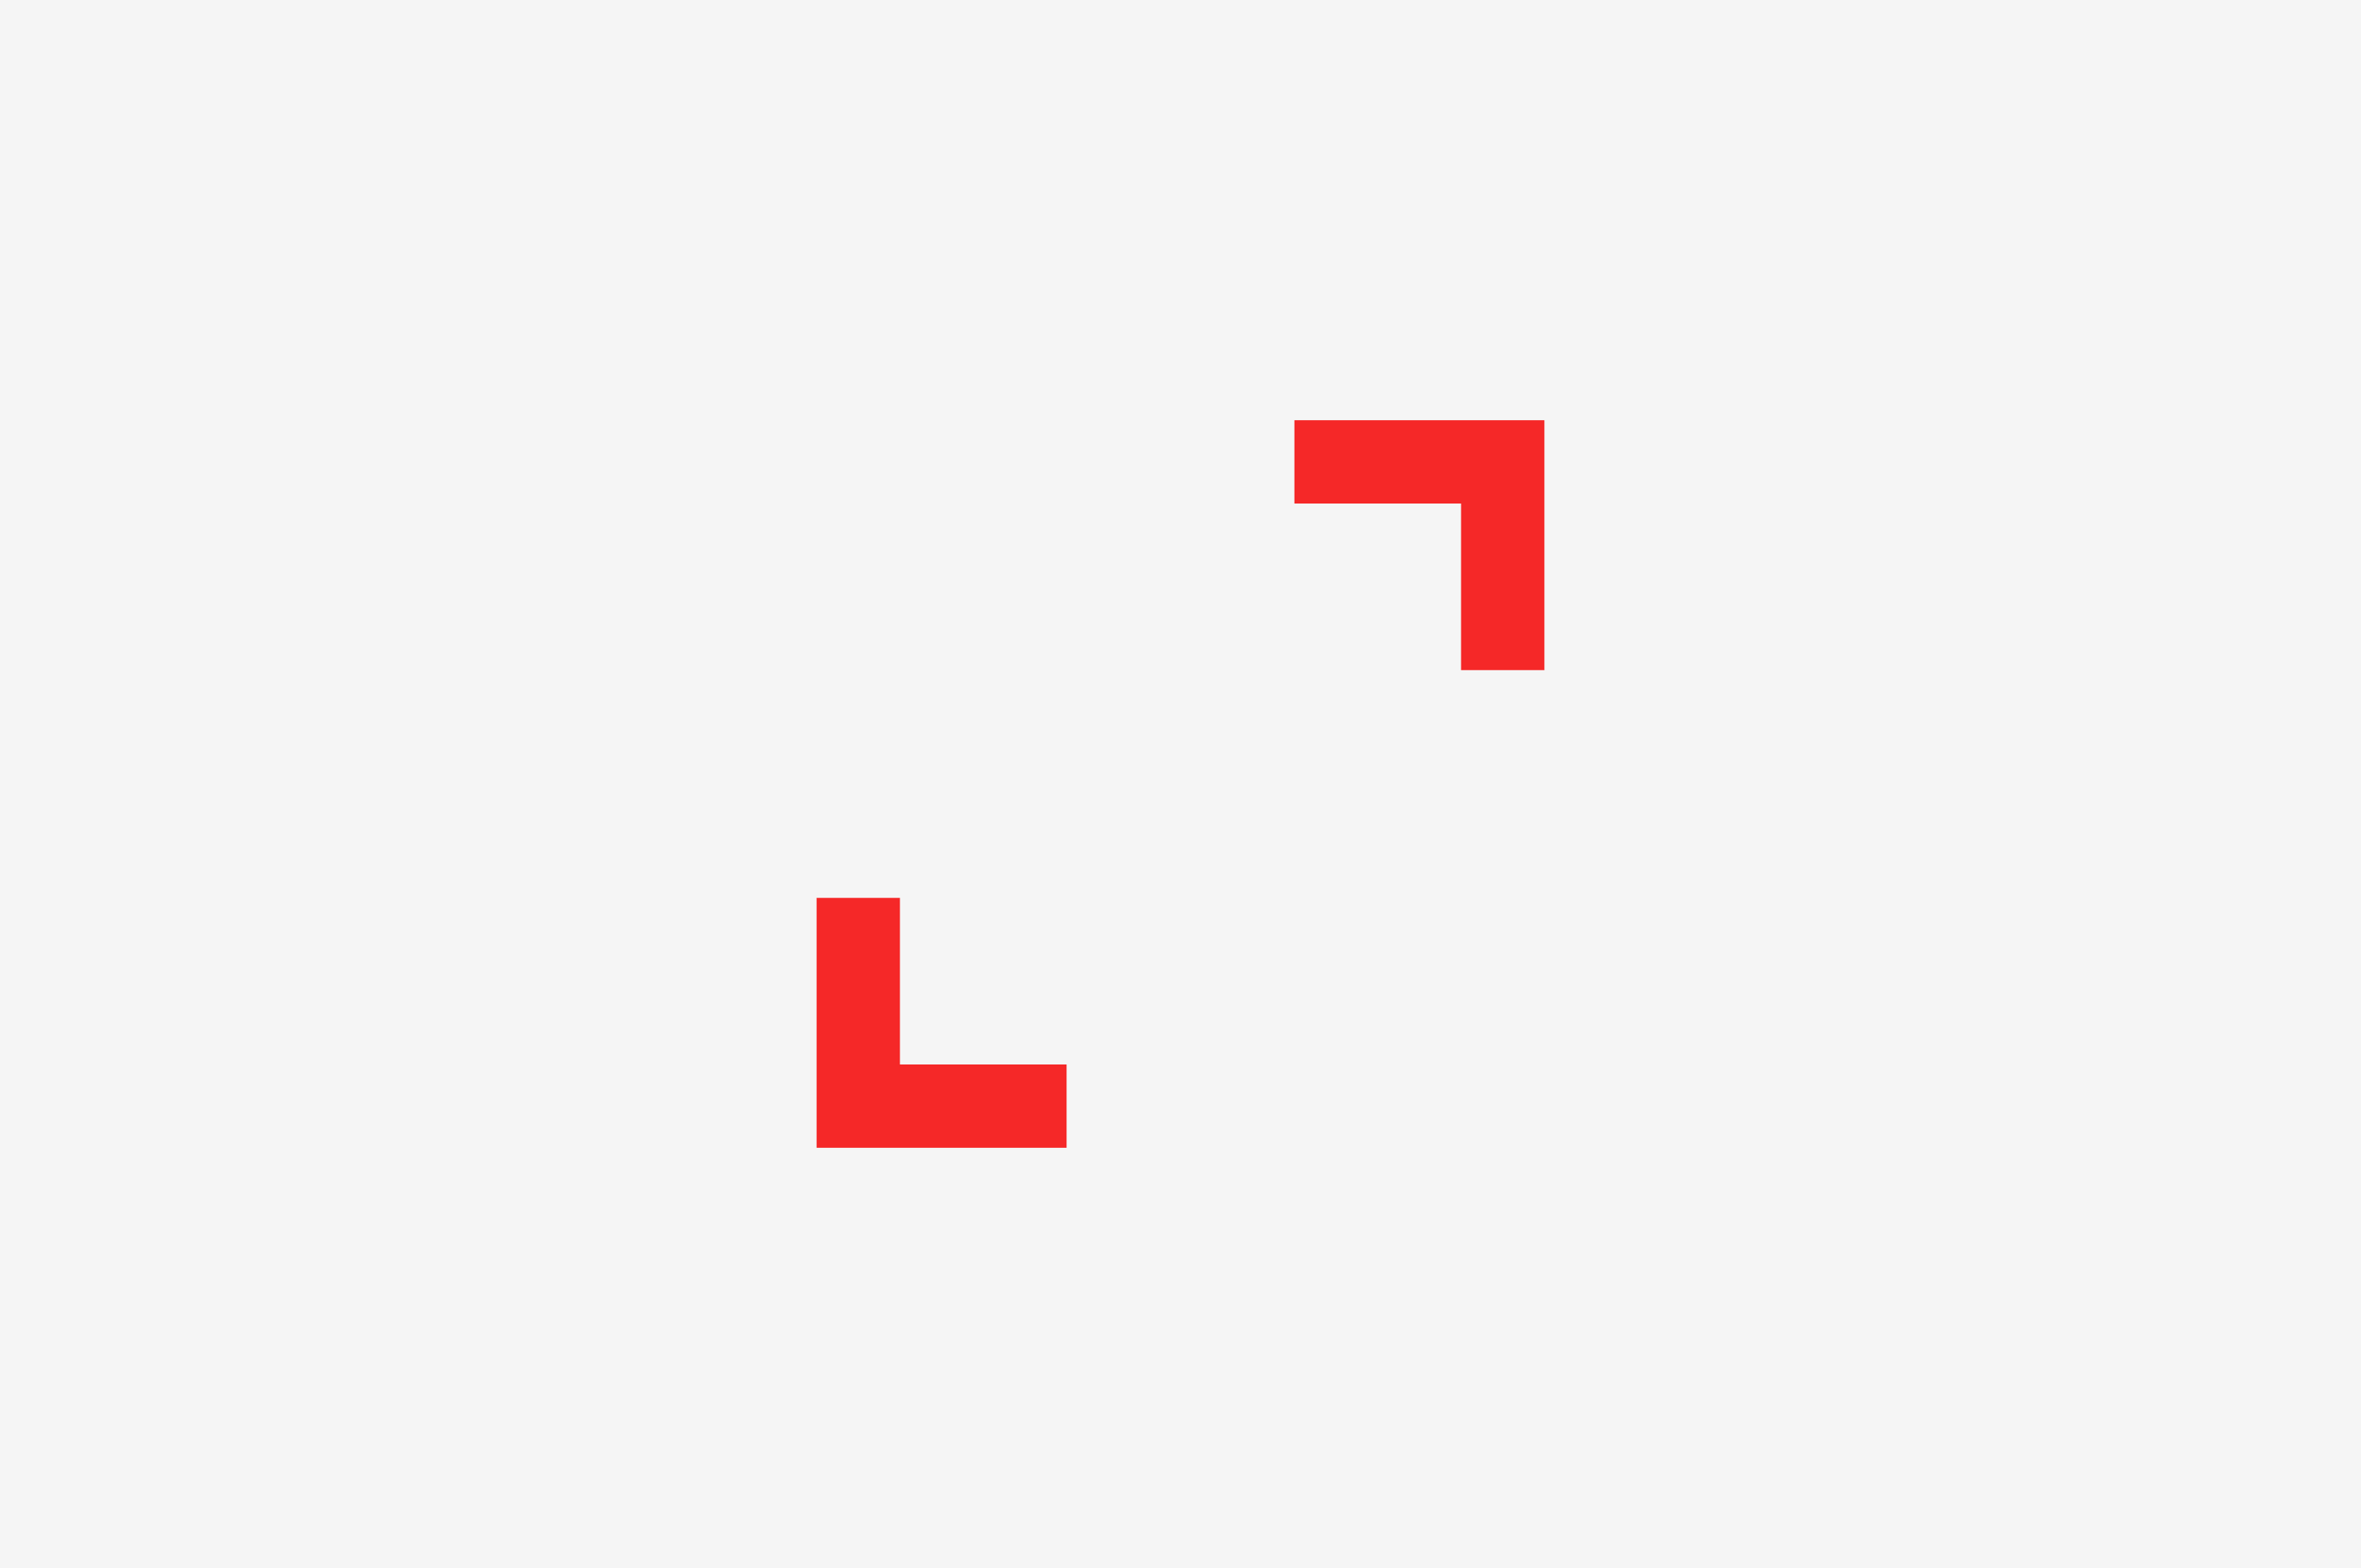 Flipboard Logo - Brand New: New Logo and Identity for Flipboard by Moniker and In-house